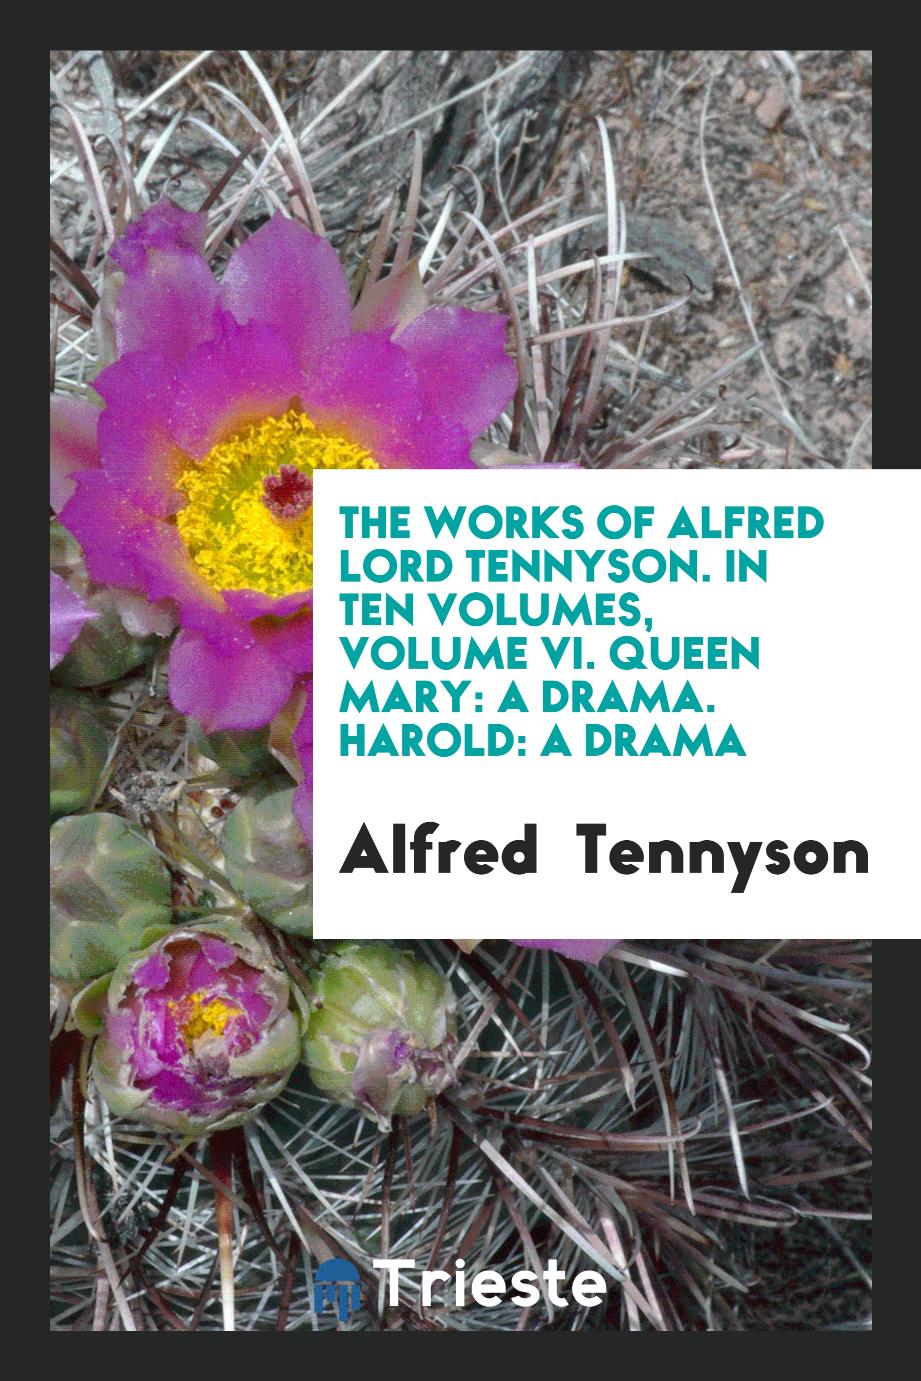 The Works of Alfred Lord Tennyson. In Ten Volumes, Volume VI. Queen Mary: A Drama. Harold: A Drama